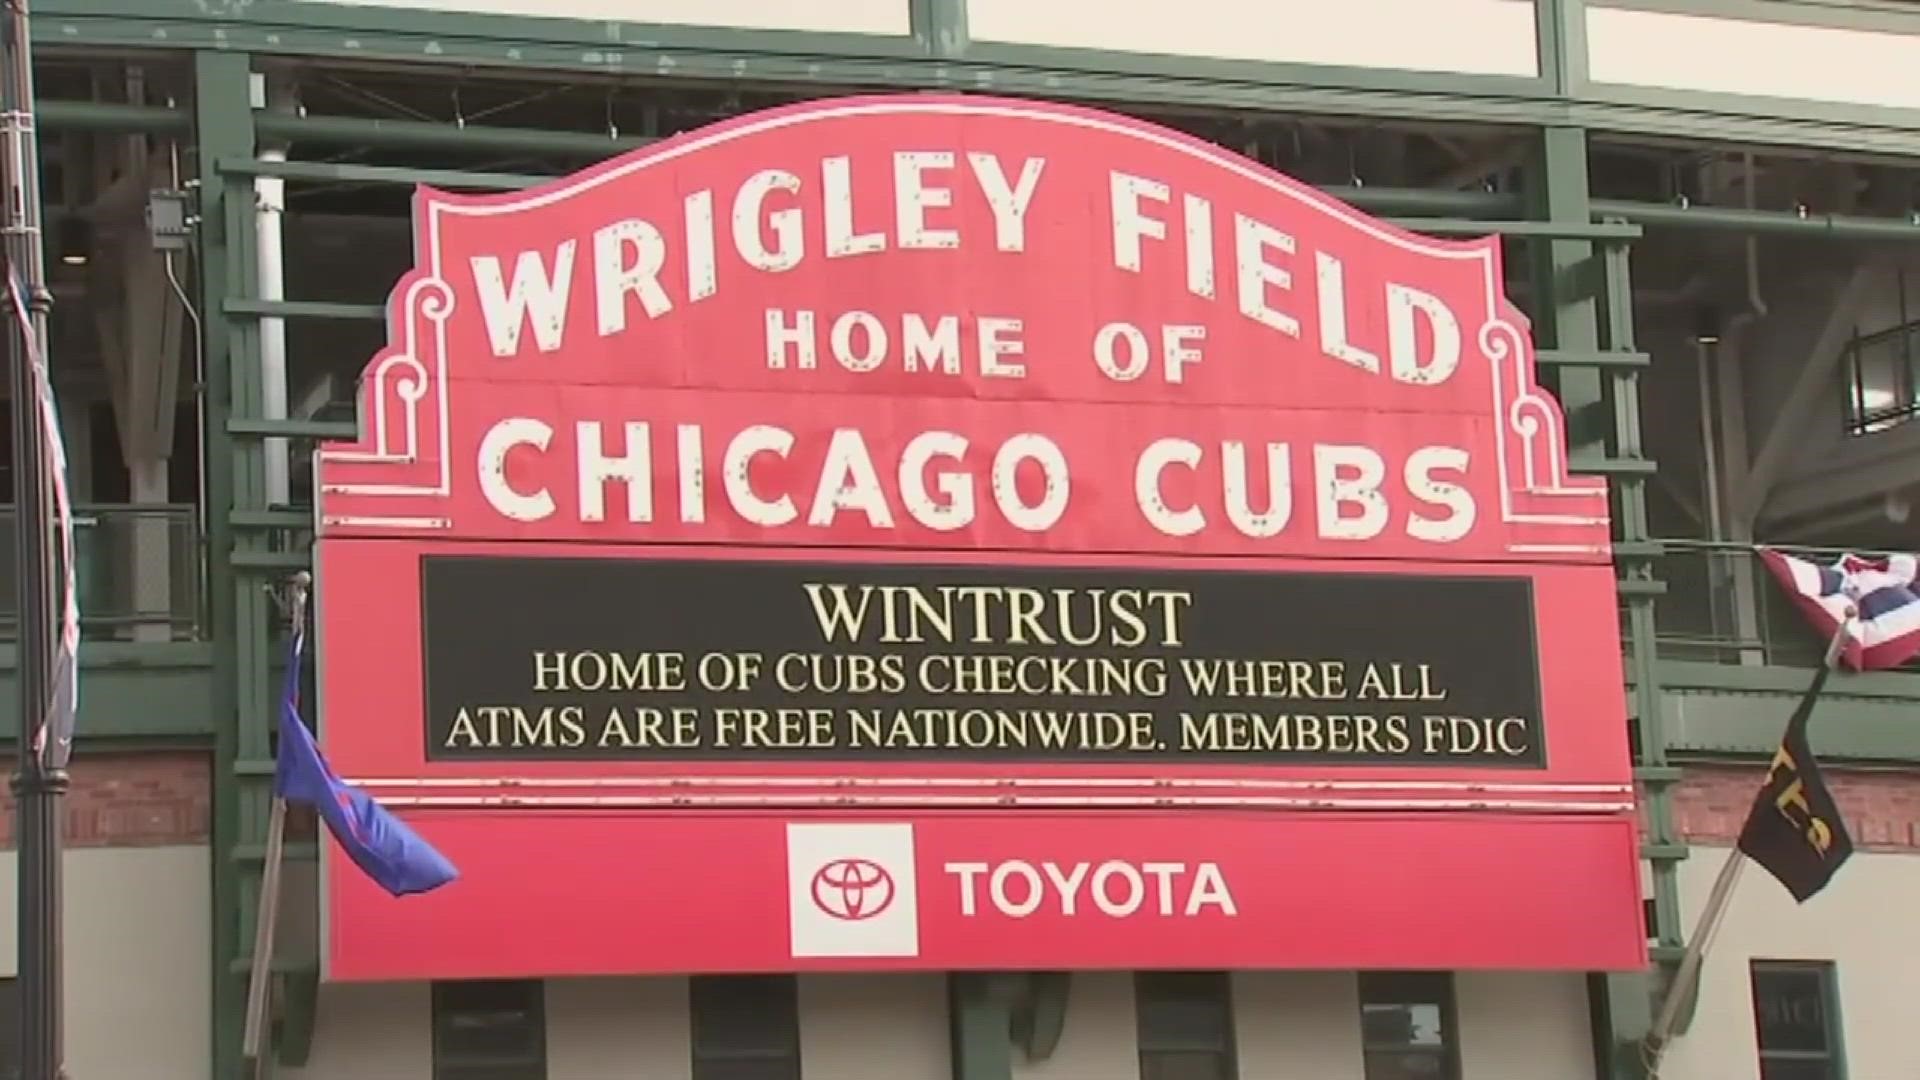 Chicago's Wrigley Field will host a college football game for the third time since 2010 when Iowa plays Northwestern next season.